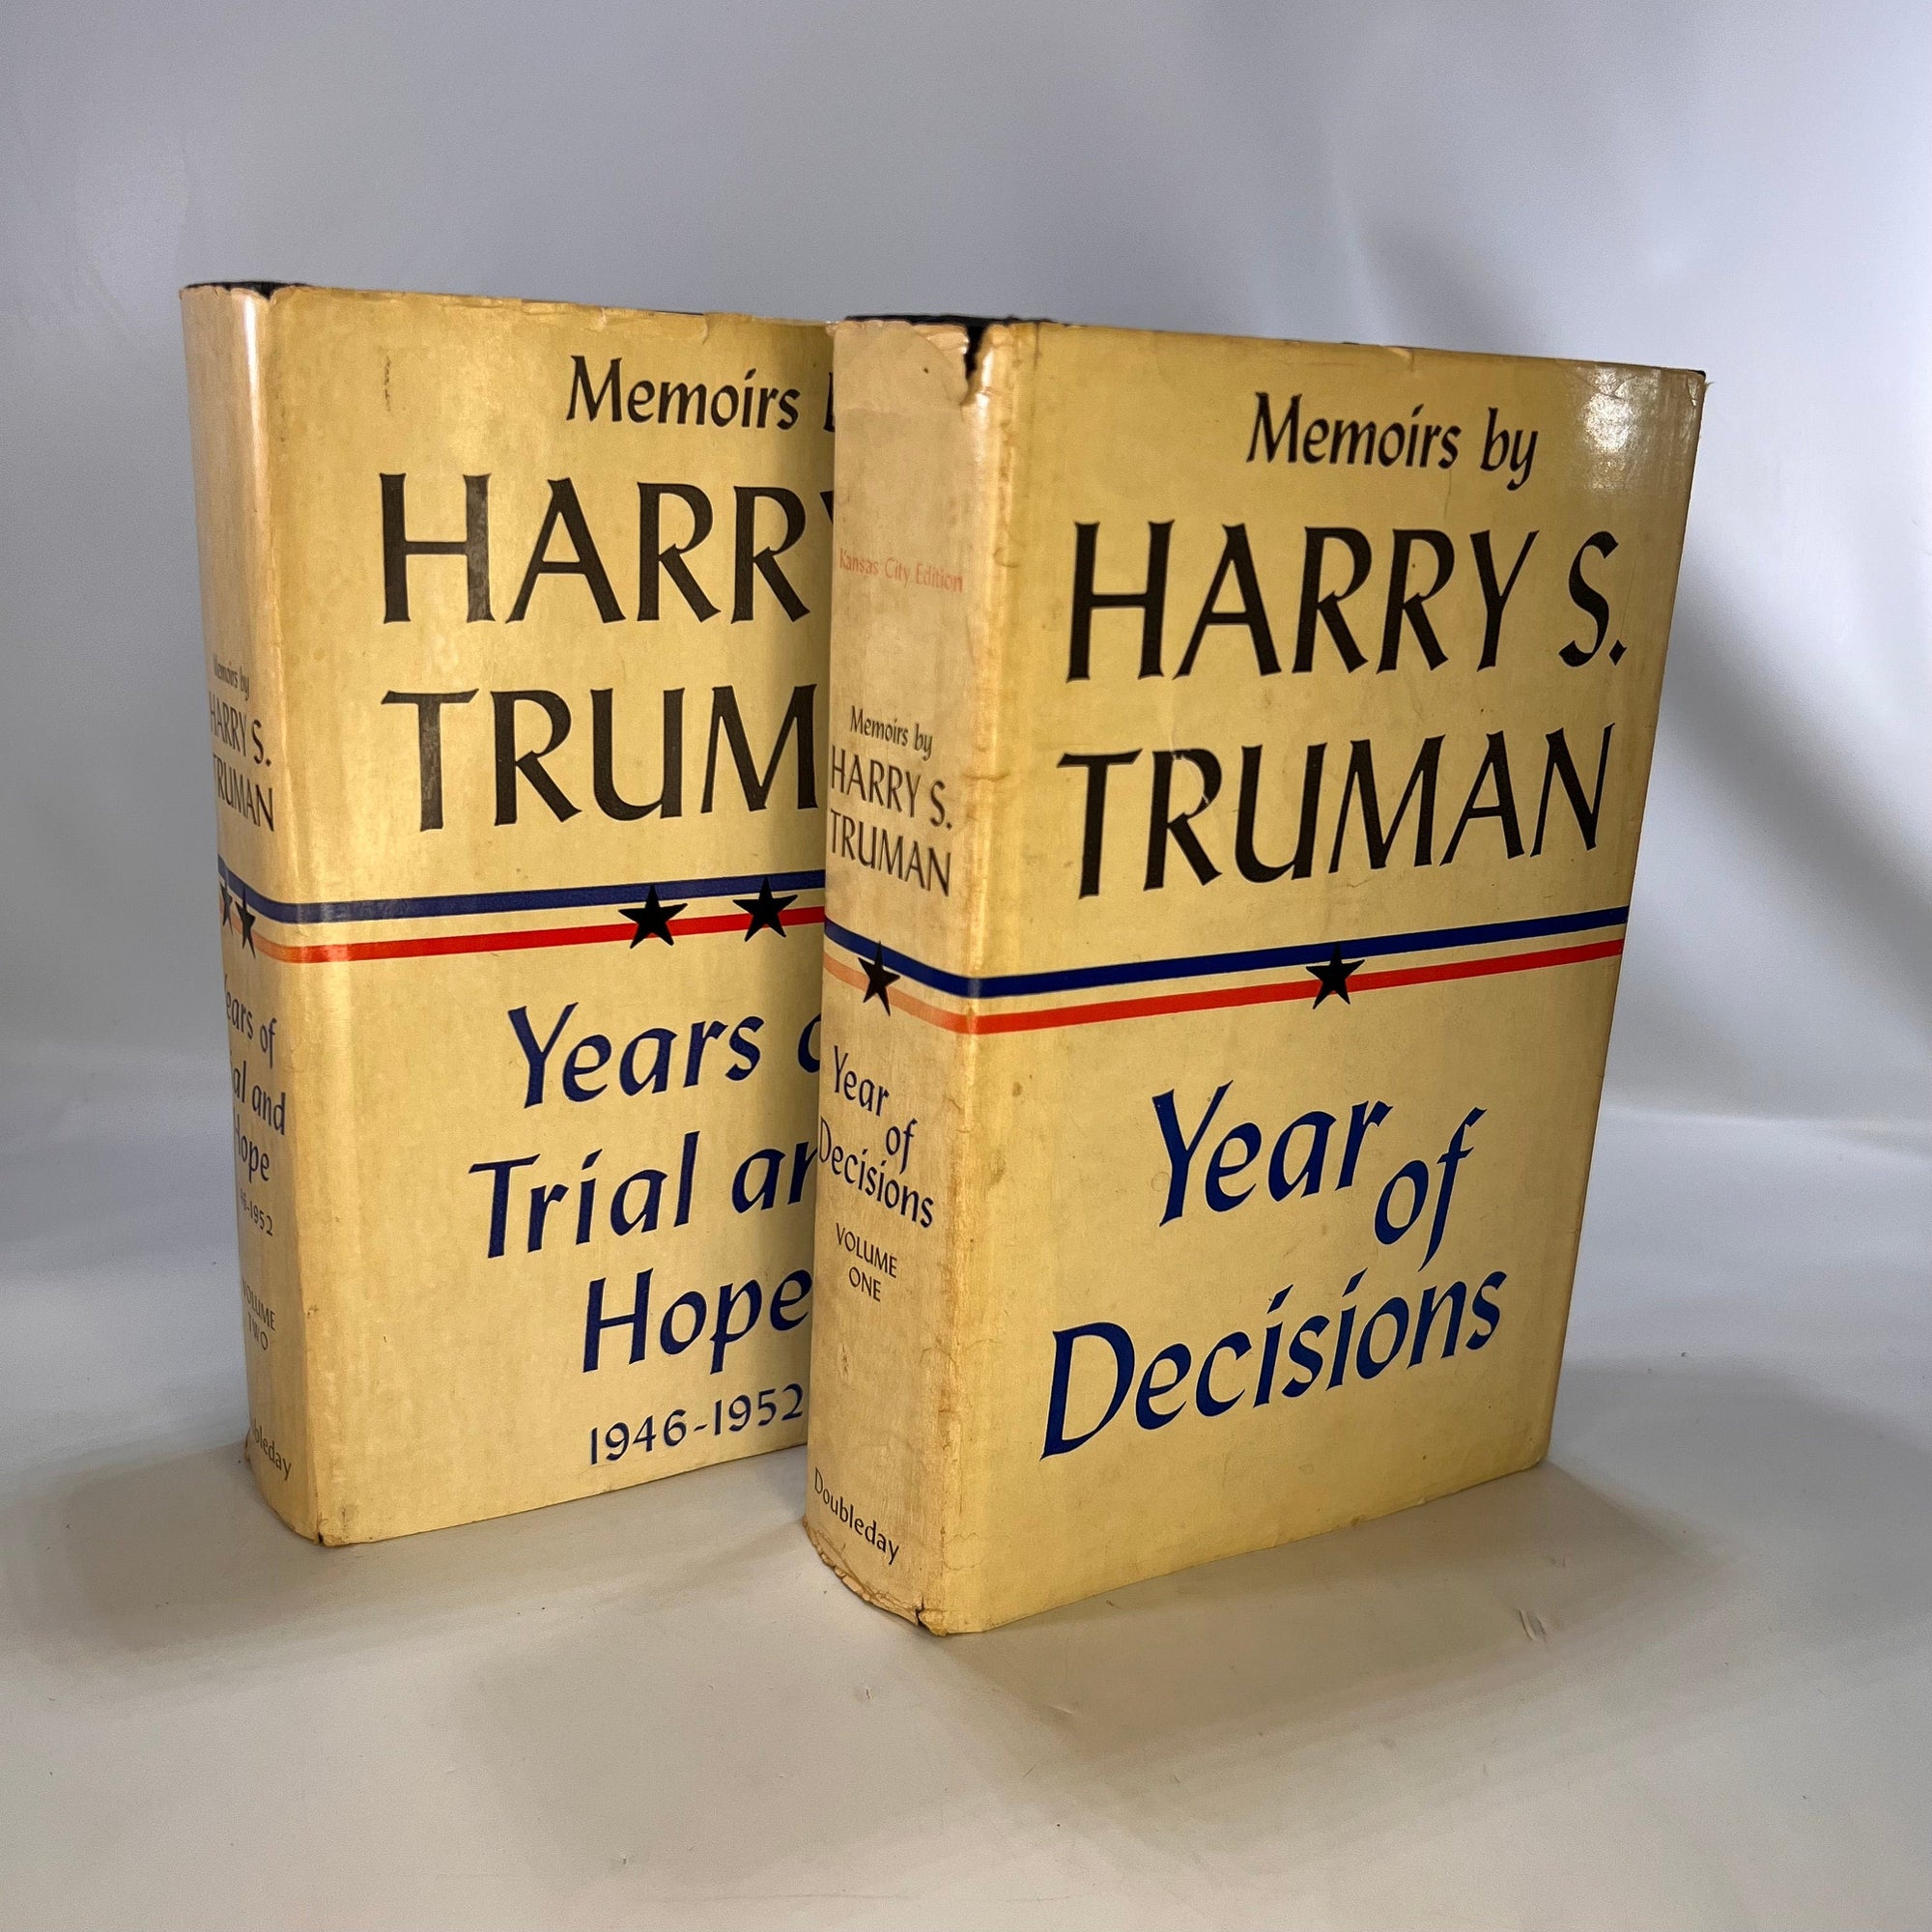 Memoirs of Harry S. Truman Volume One A Year of Decisions 1955 Two Years of Trial and Hope 1956 Double Day & Company Vintage Book